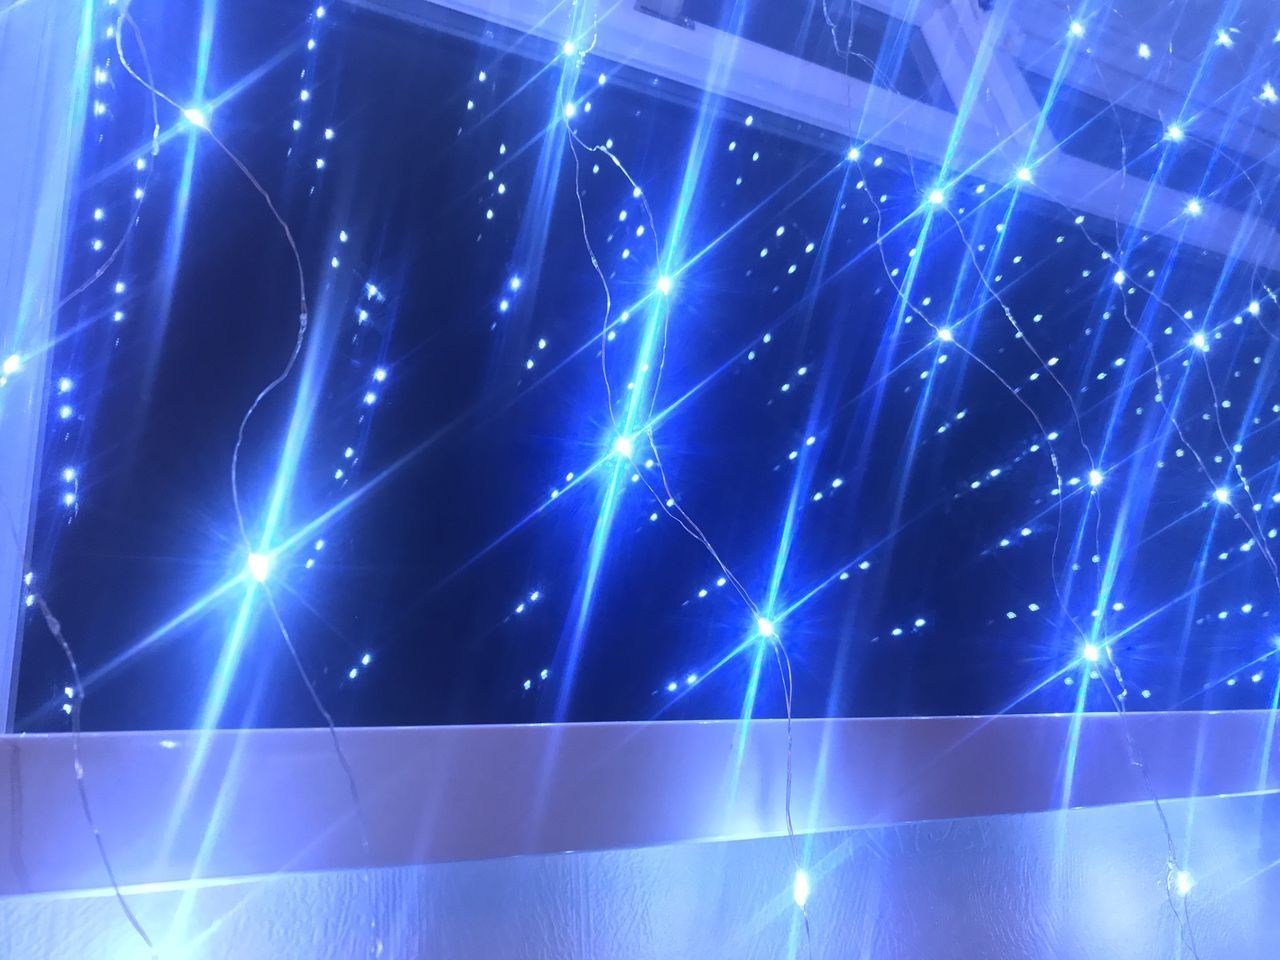 LOW ANGLE VIEW OF ILLUMINATED LIGHTS AGAINST BLUE SKY